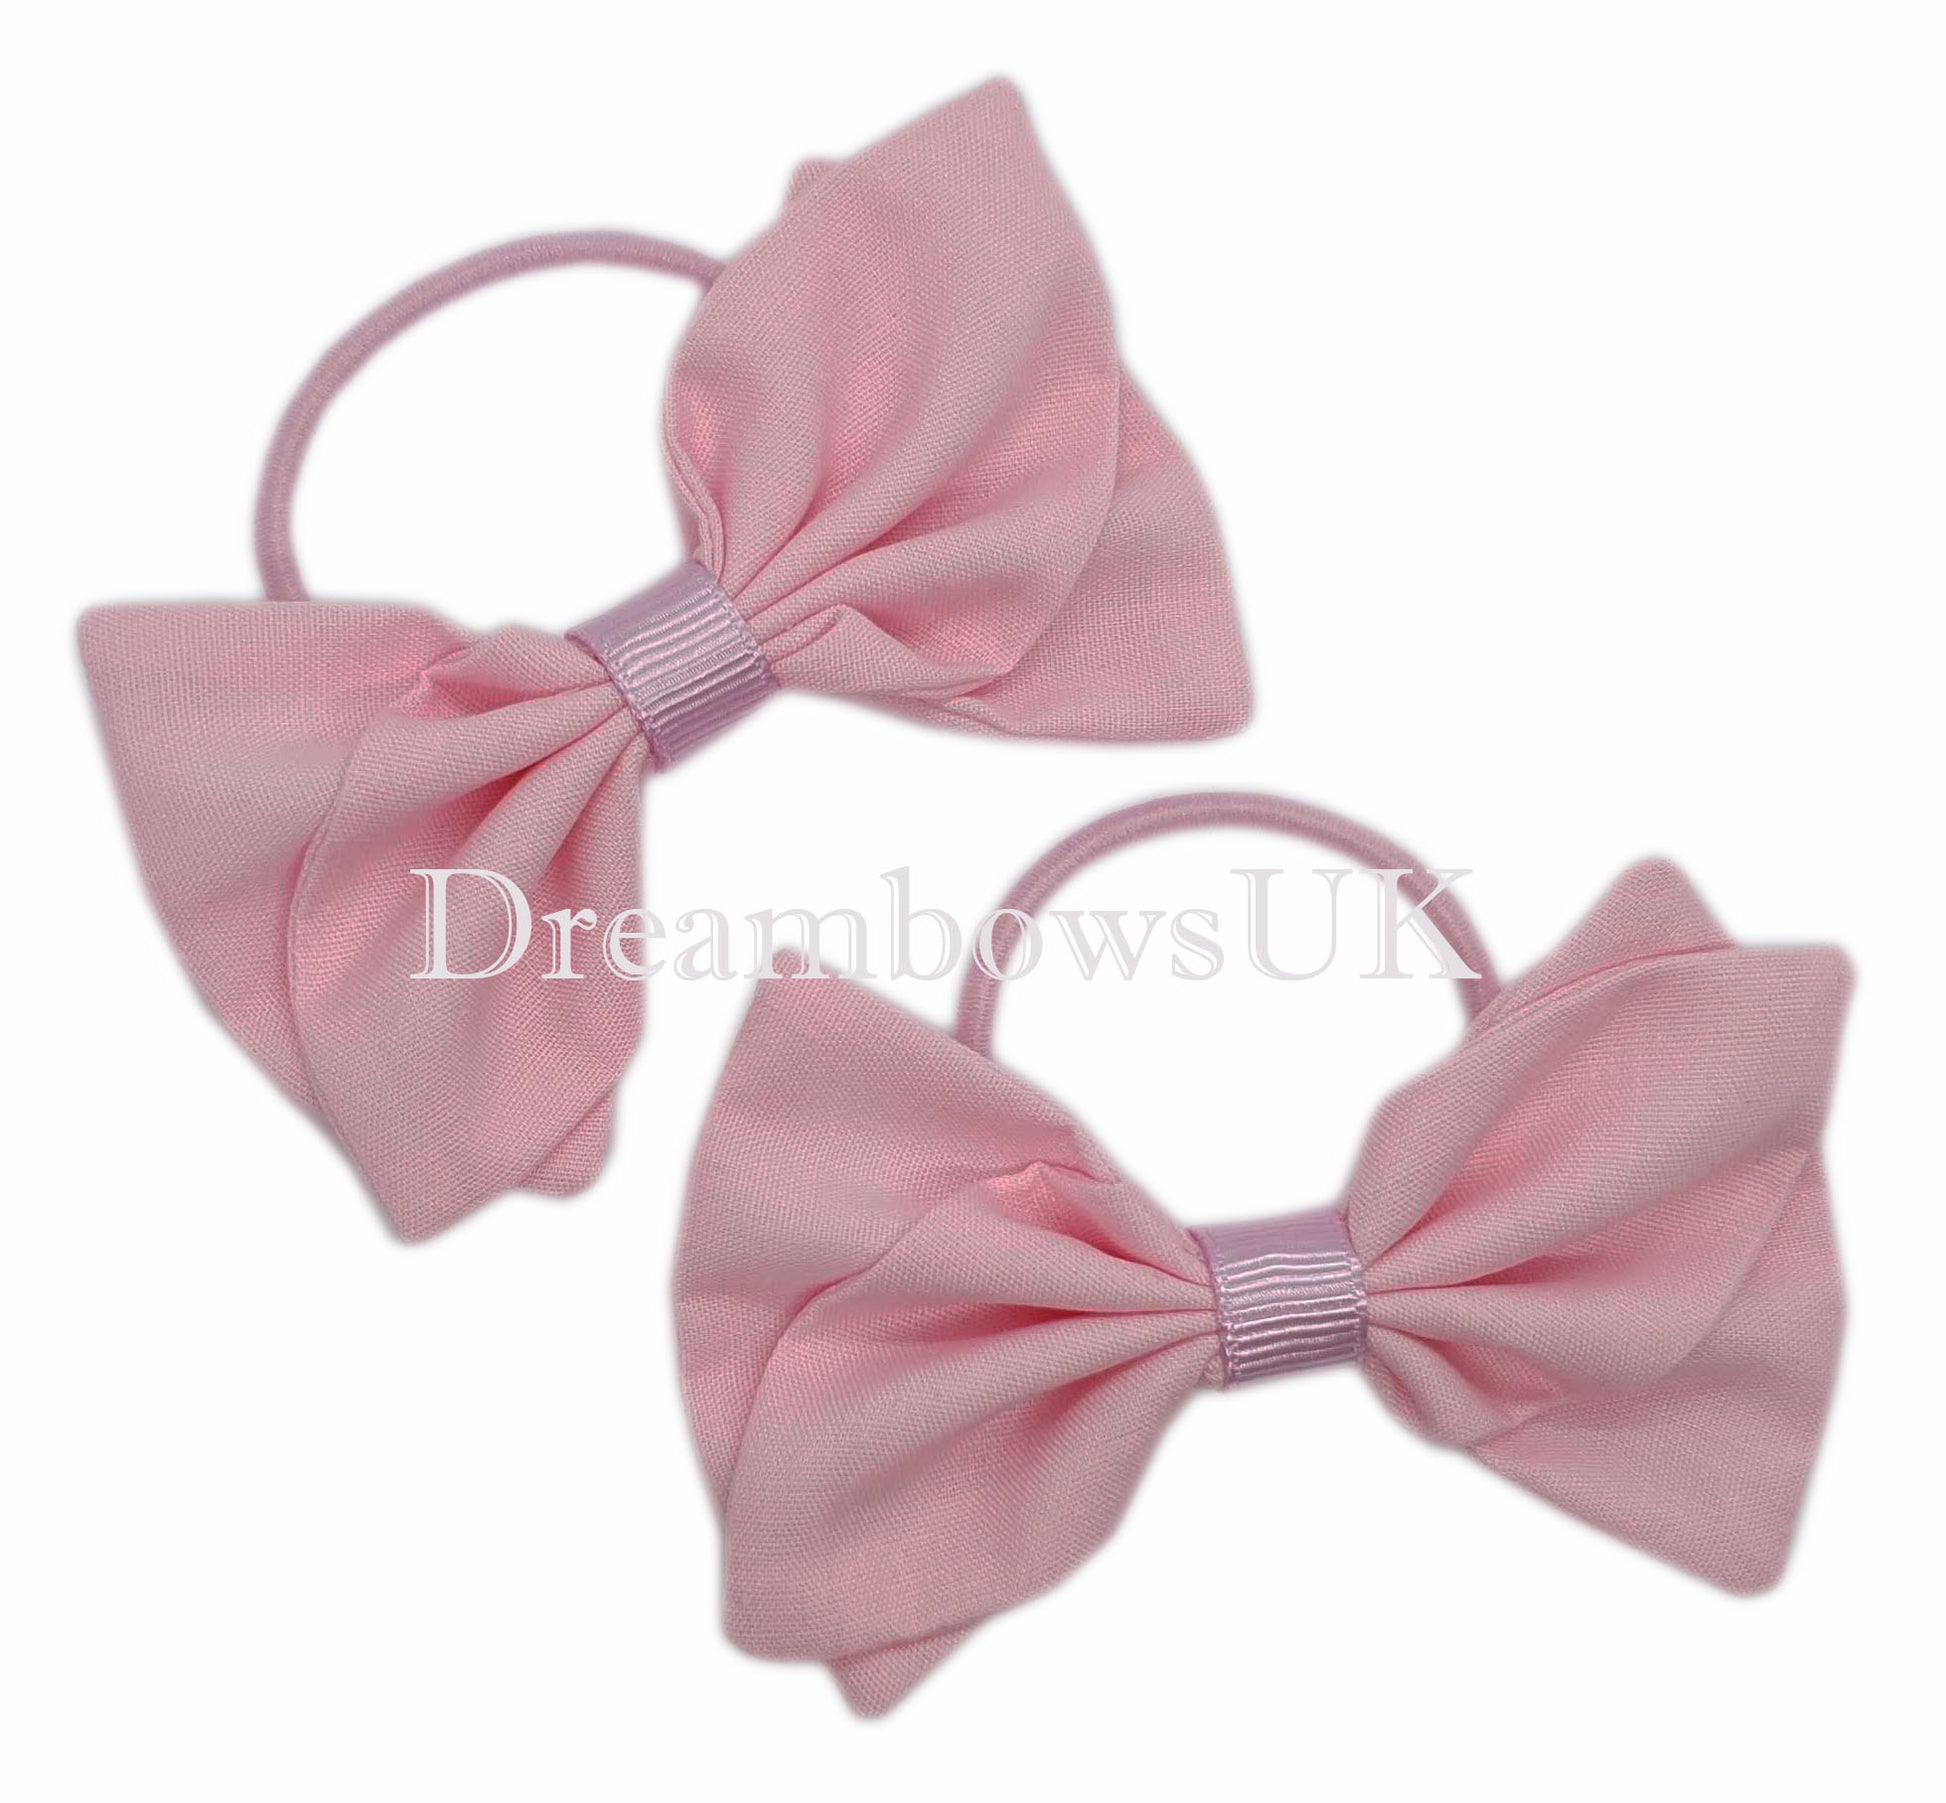 Girls baby pink fabric hair bows on thin hair bobbles